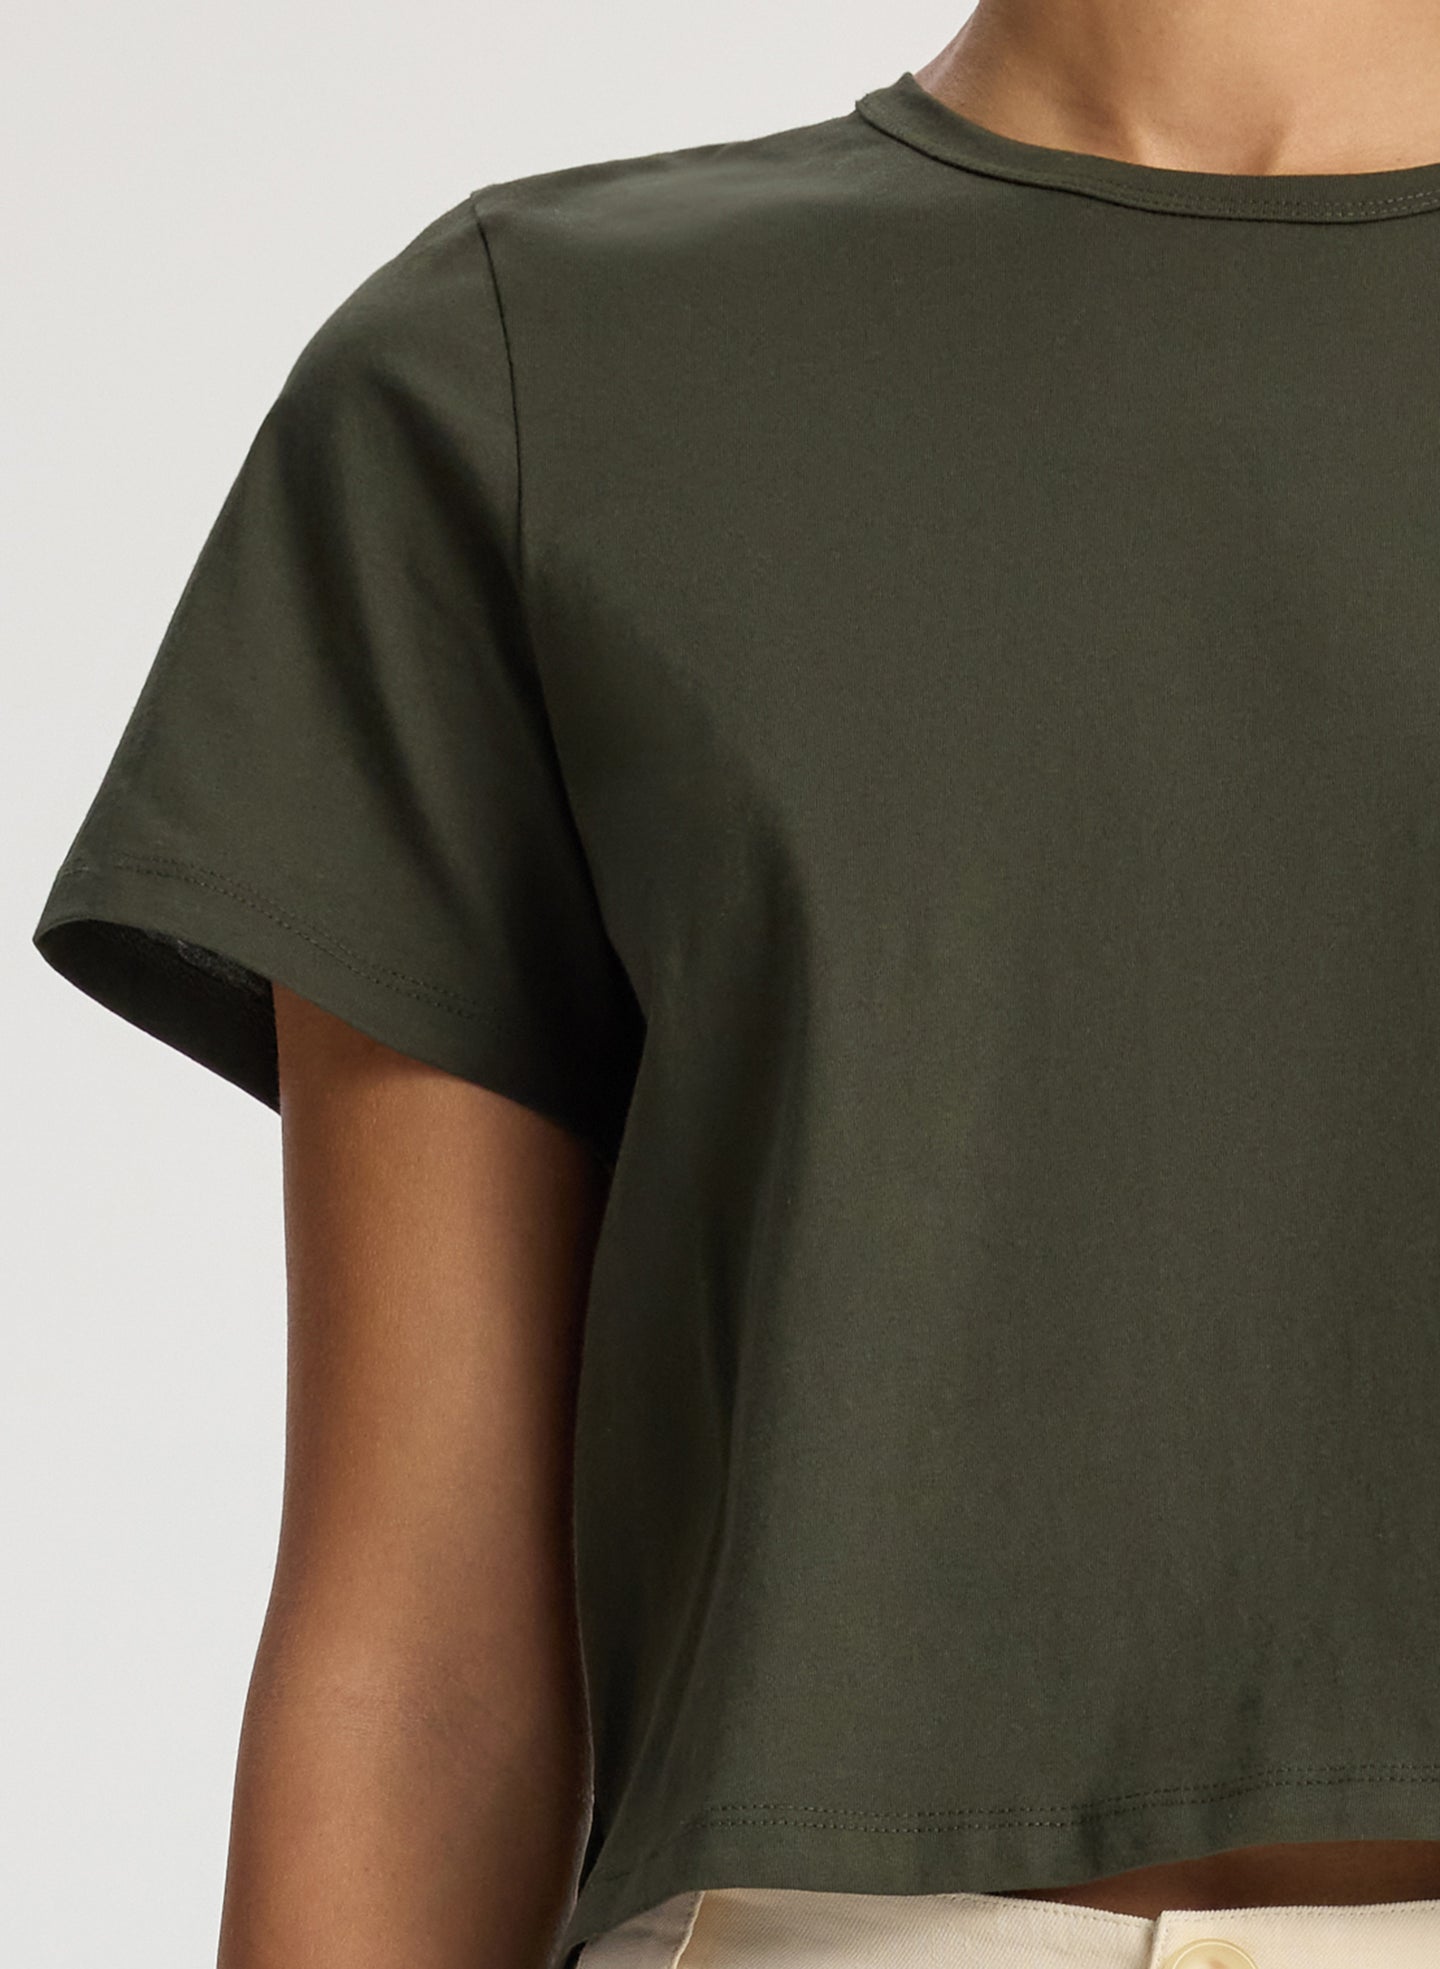 detail view of woman wearing olive green short sleeve tshirt and beige wide leg pants